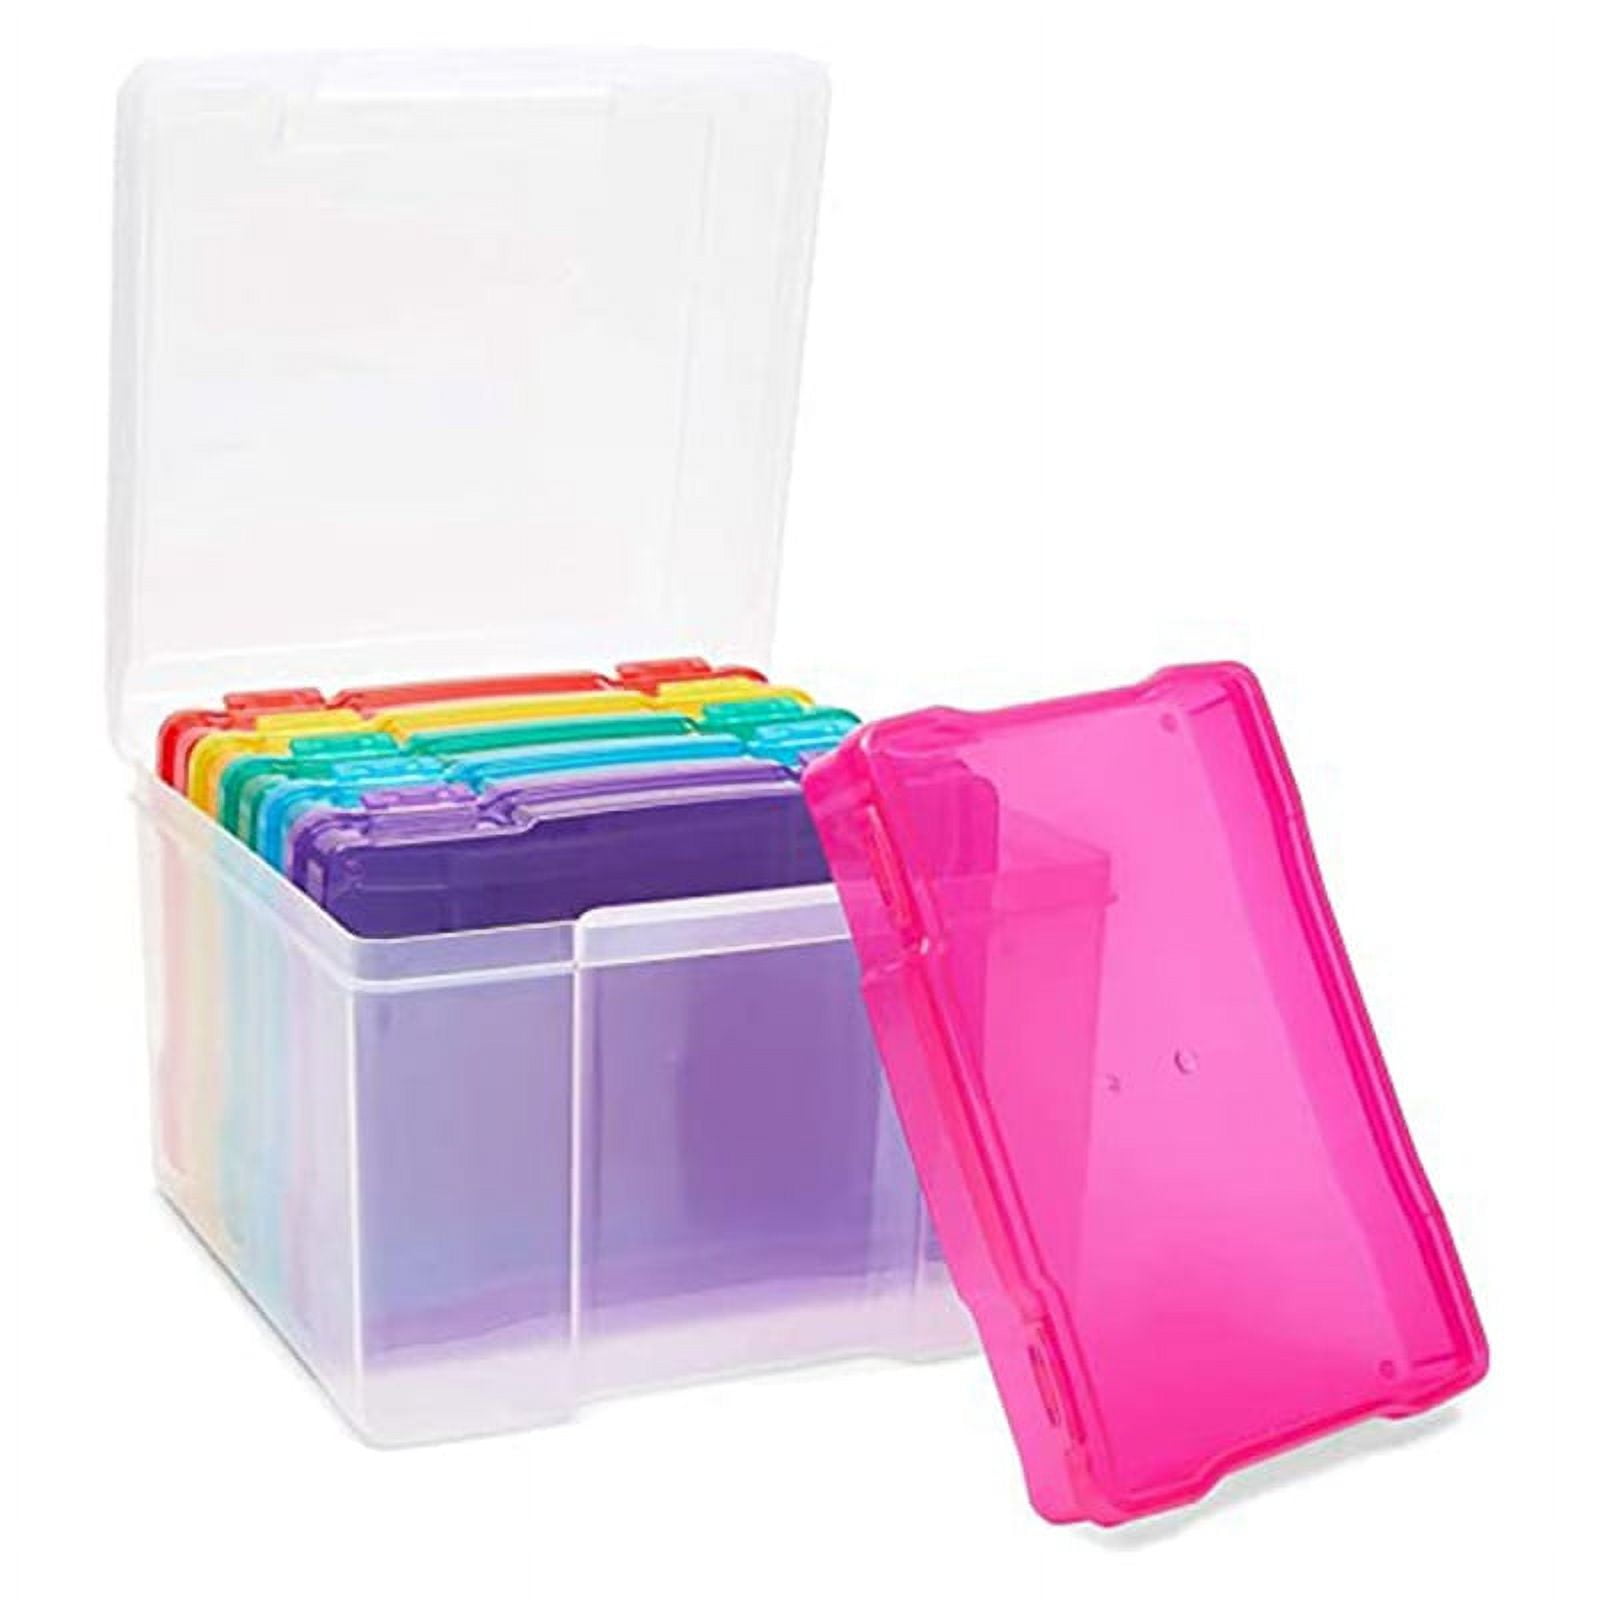 5x7 inch Photo Storage Box Plastic Picture Keeper 6 Colorful Photo Cases